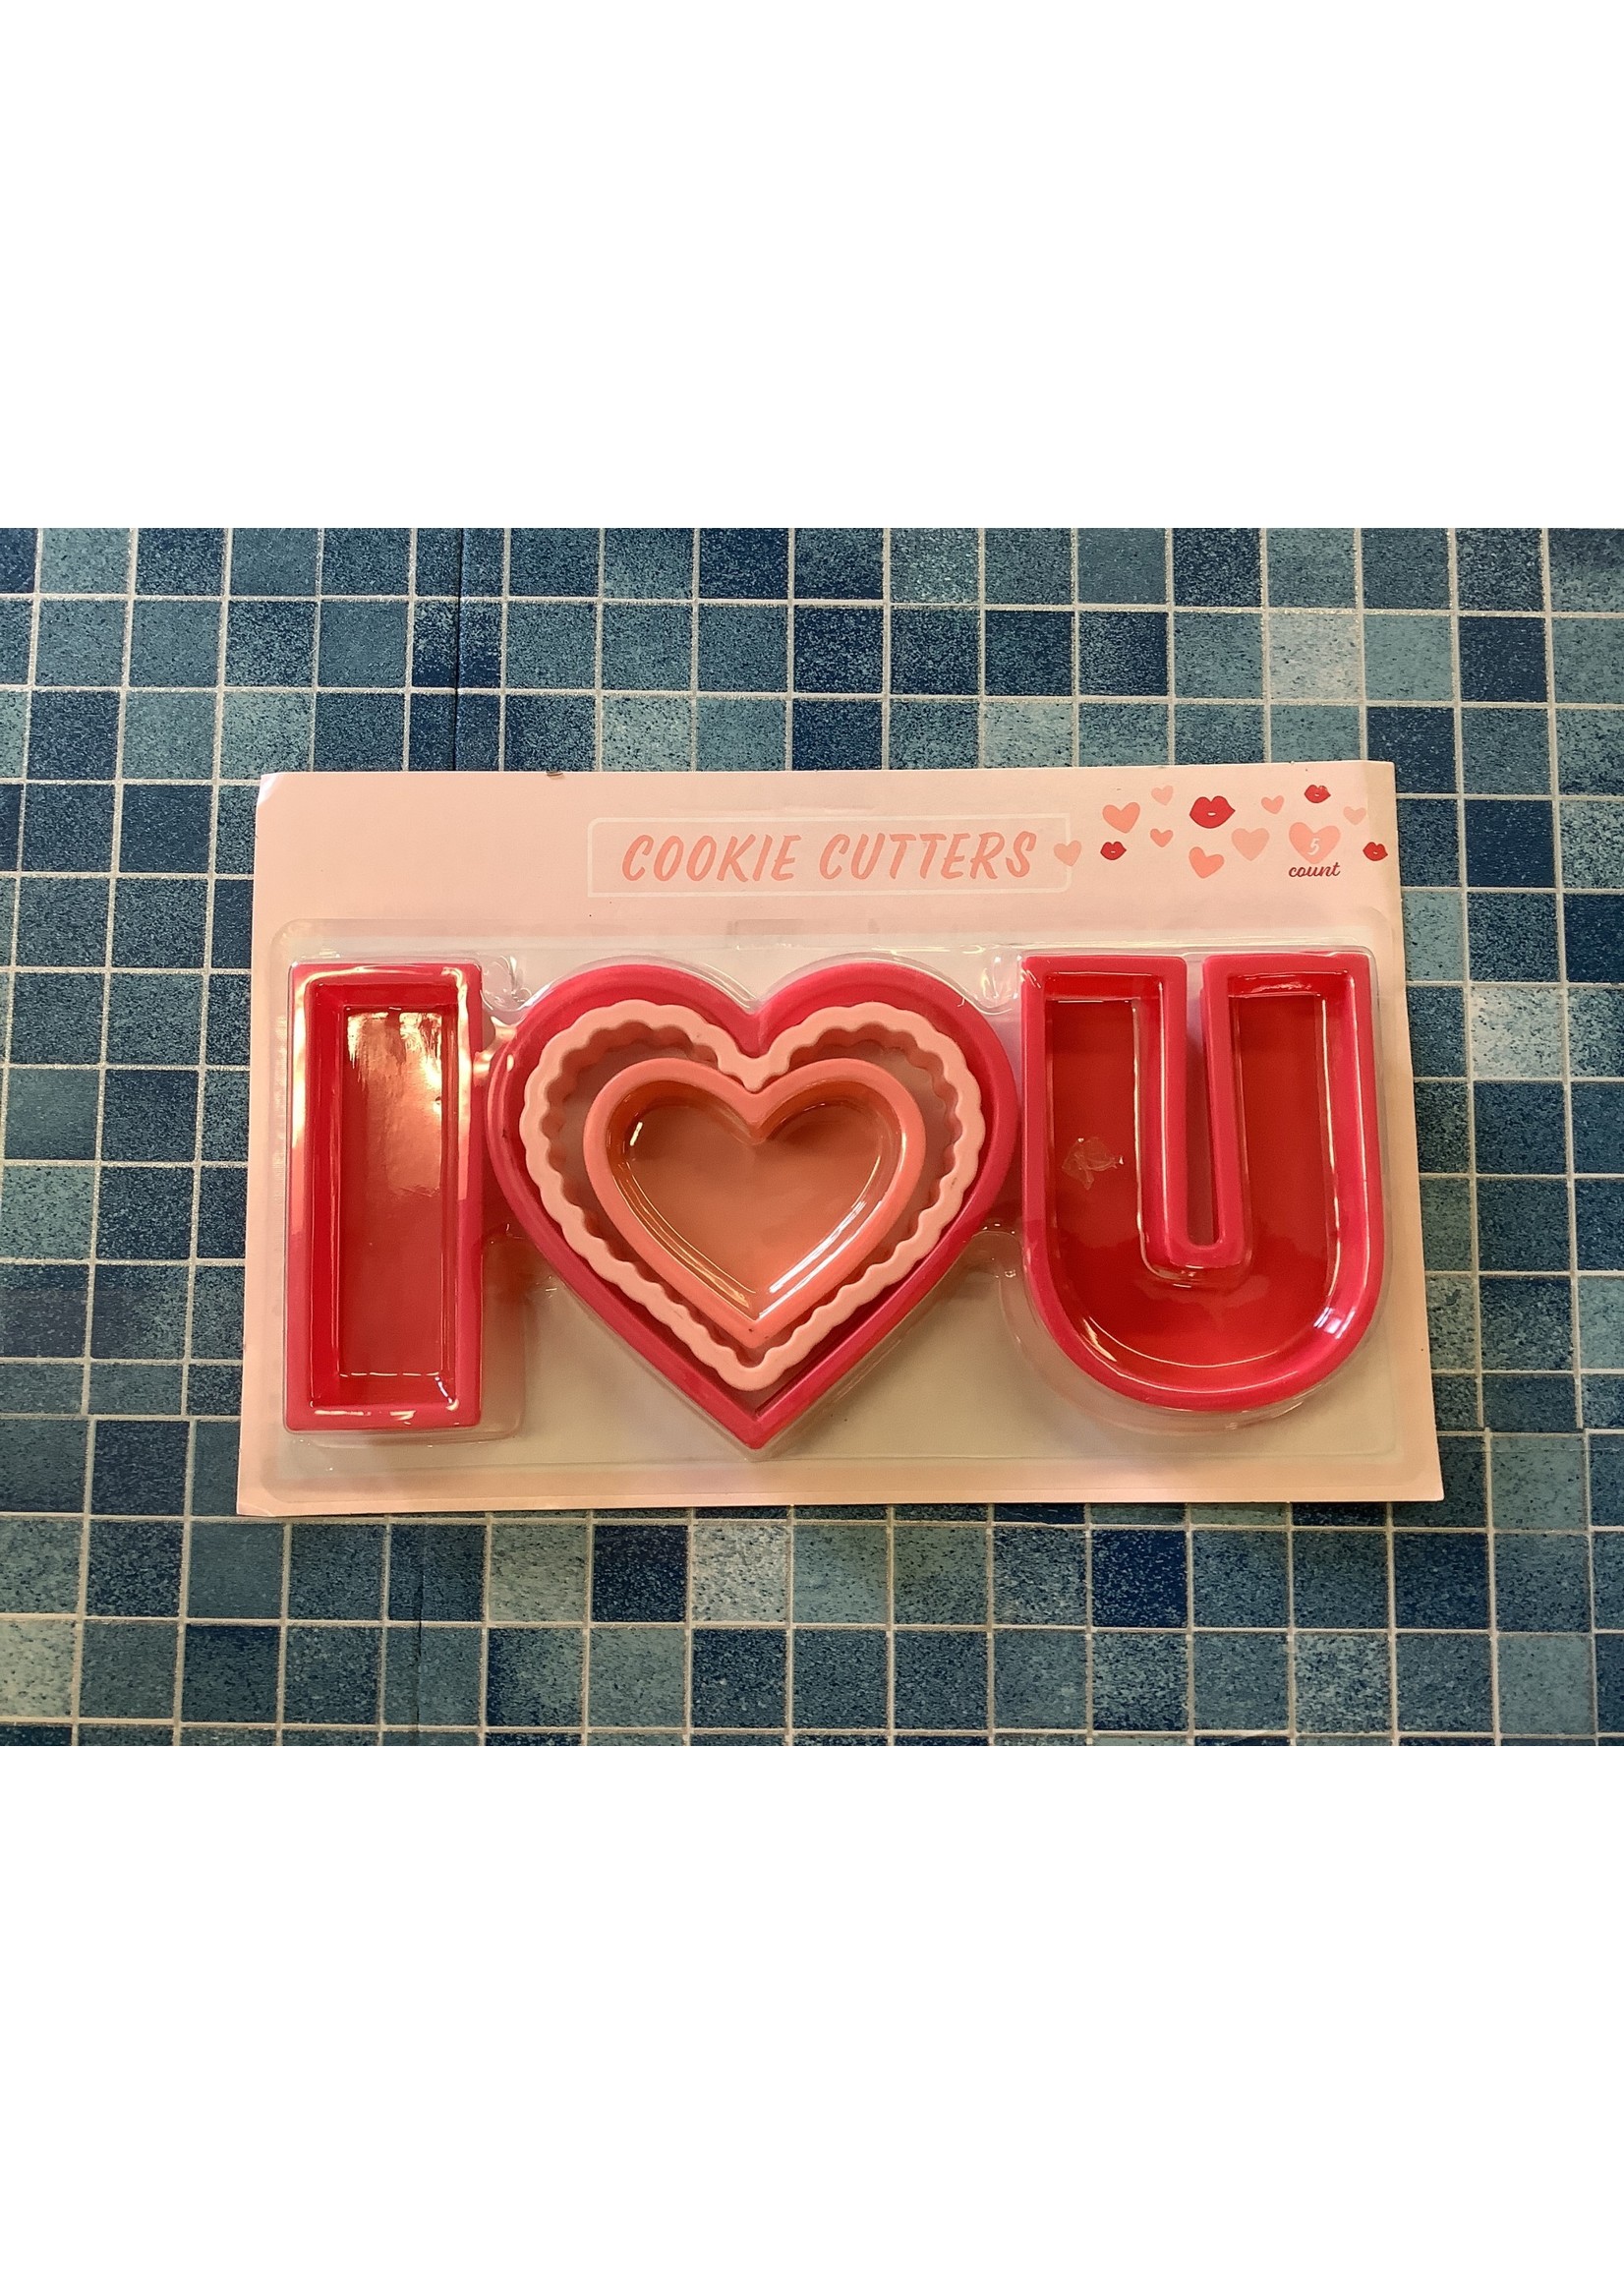 I love you cookie cutters